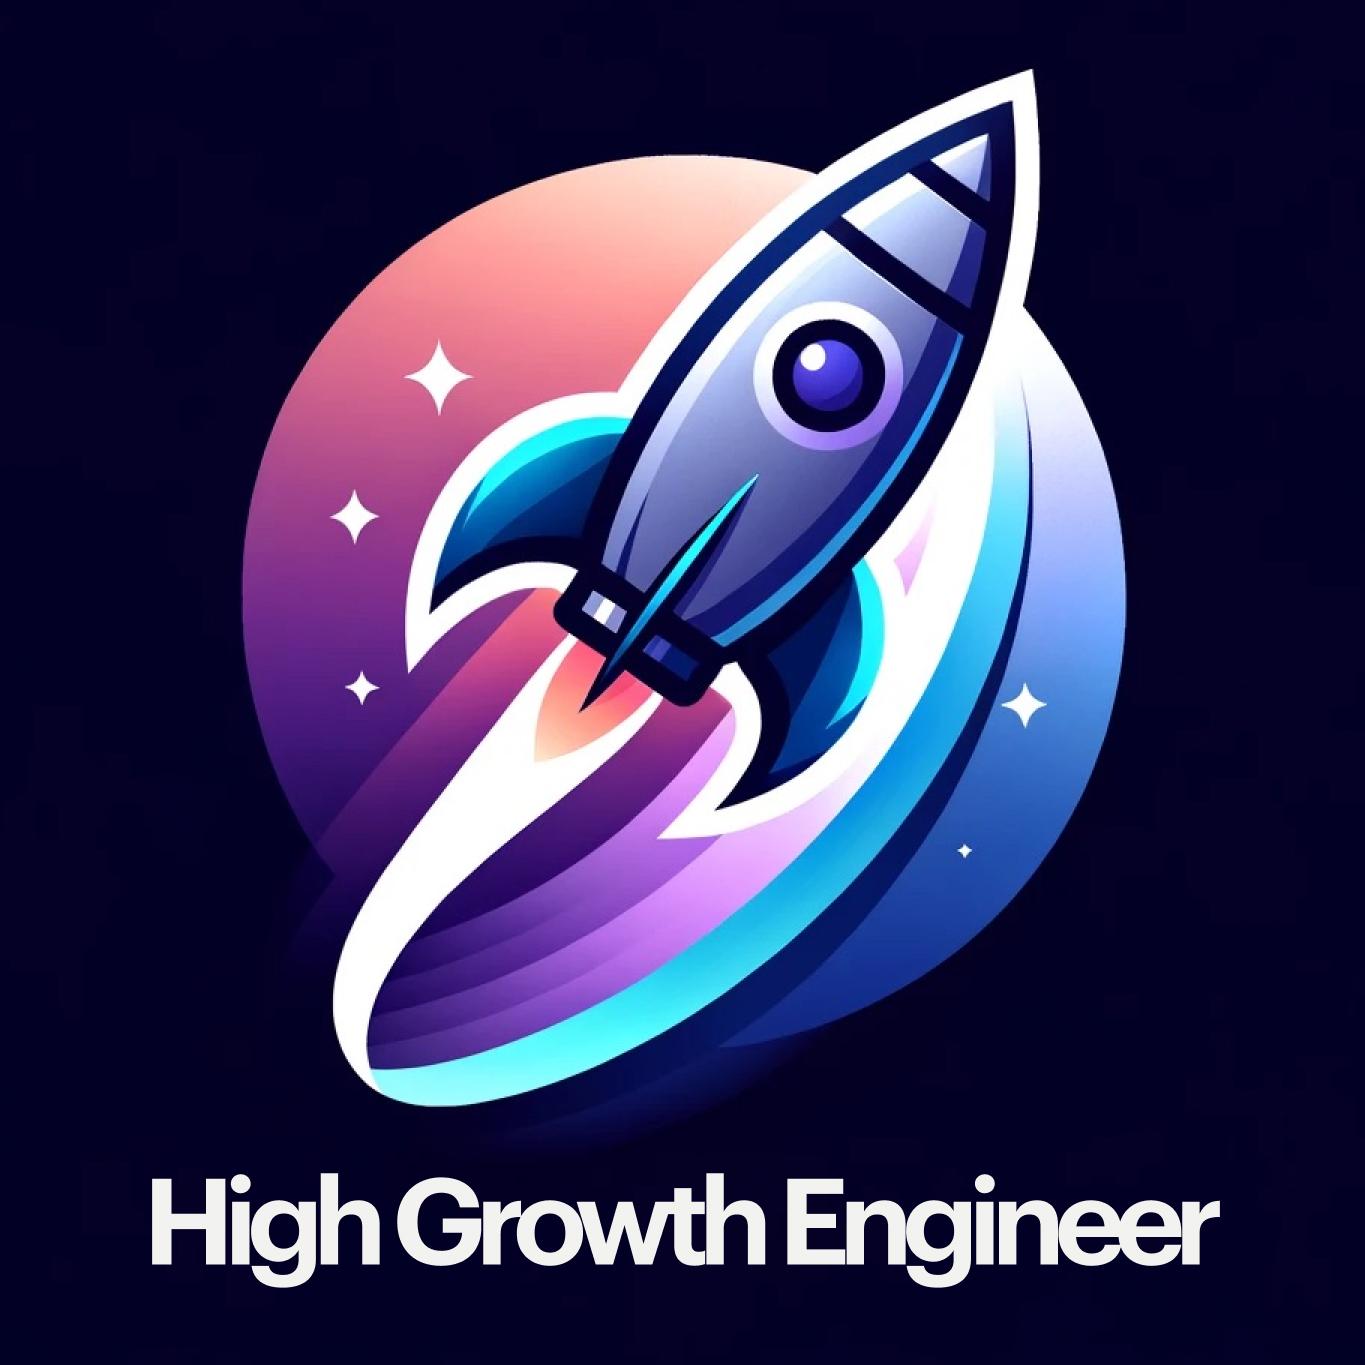 The High Growth Engineer logo, a rocket ship blasting into space.